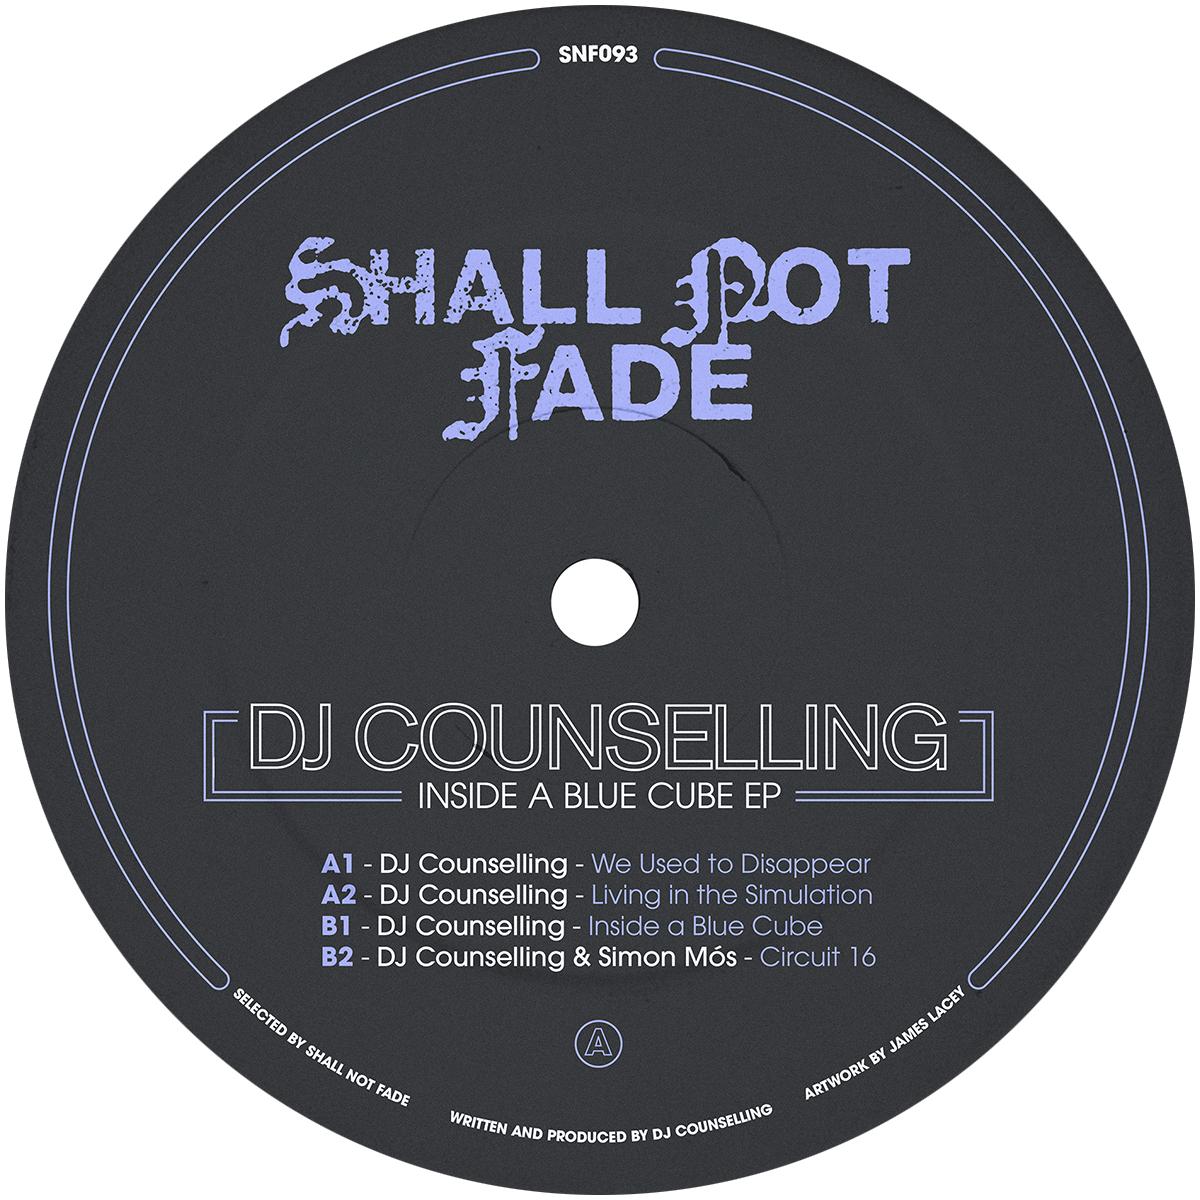 Dj Counselling - Inside a Blue Cube EP [Shall Not Fade]